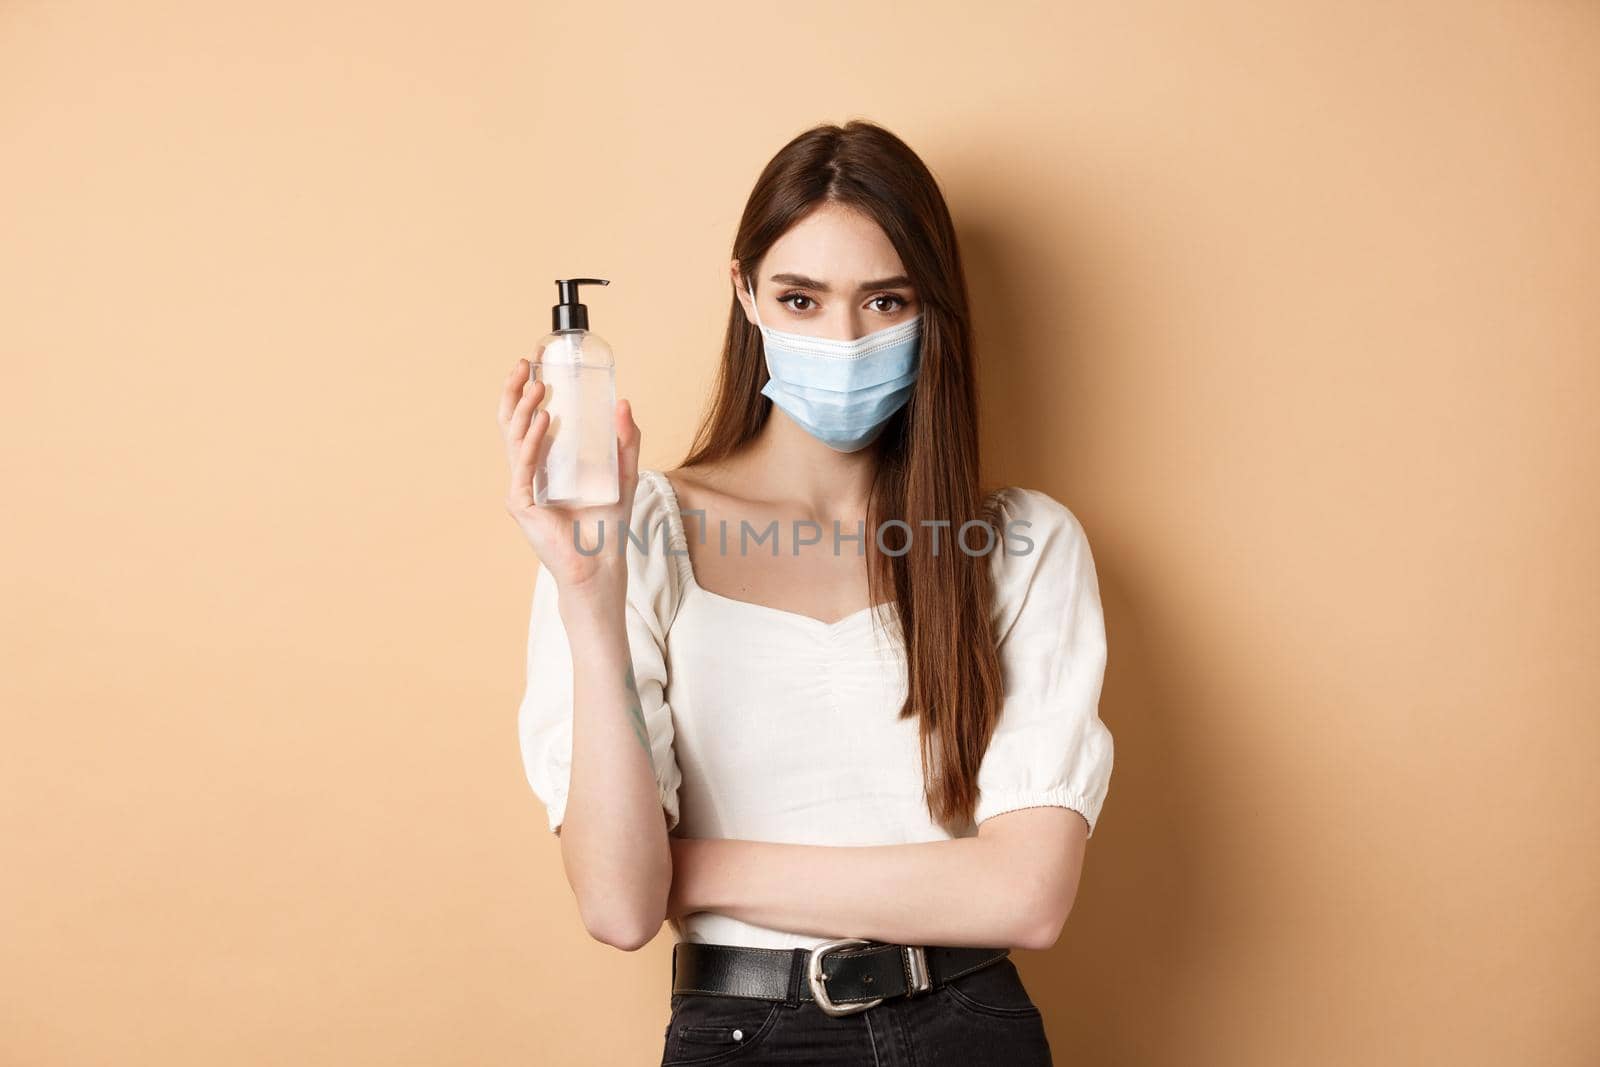 Pandemic and healthcare concept. Serious woman concerned about covid-19, wearing medical mask and showing bottle of hand sanitizer, standing on beige background by Benzoix